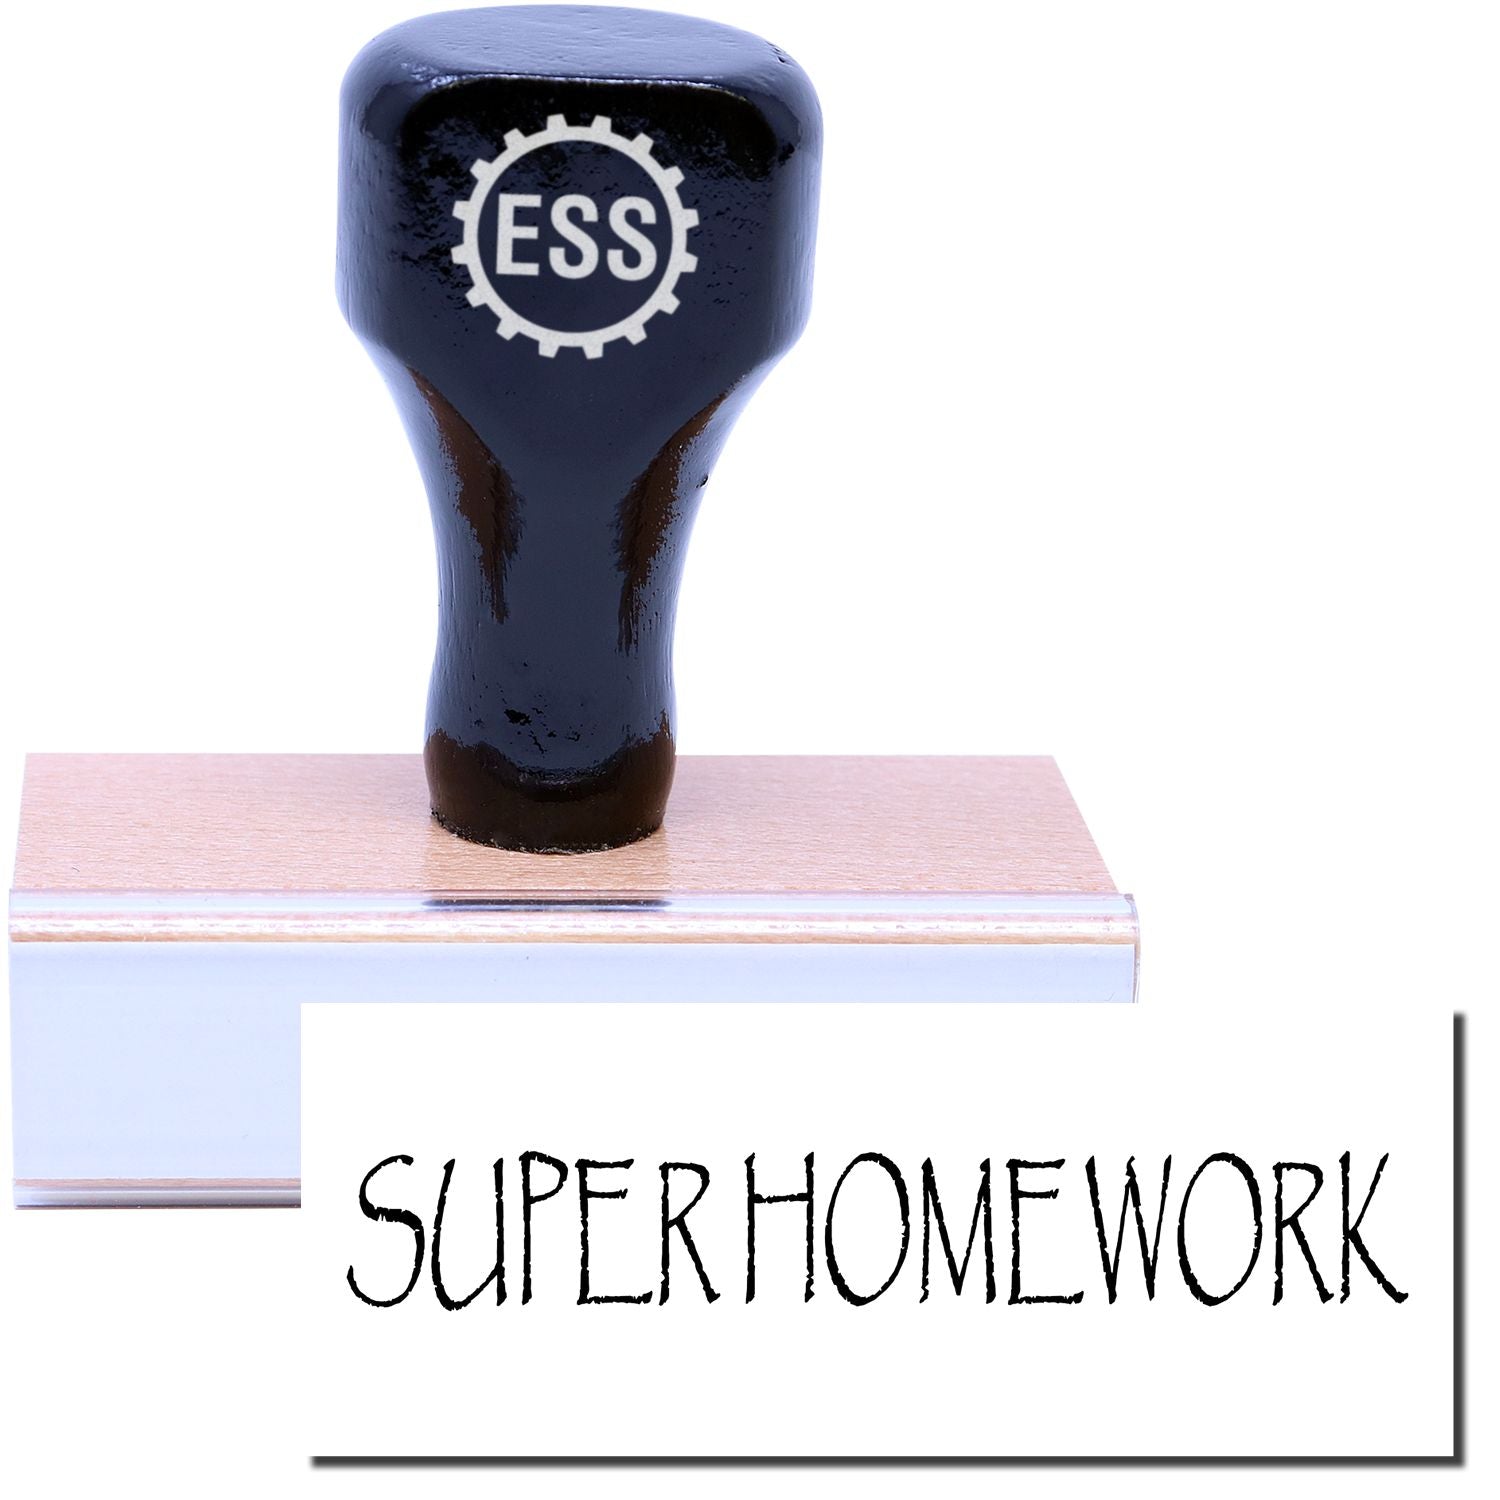 A stock office rubber stamp with a stamped image showing how the text "SUPER HOMEWORK" in a large font is displayed after stamping.